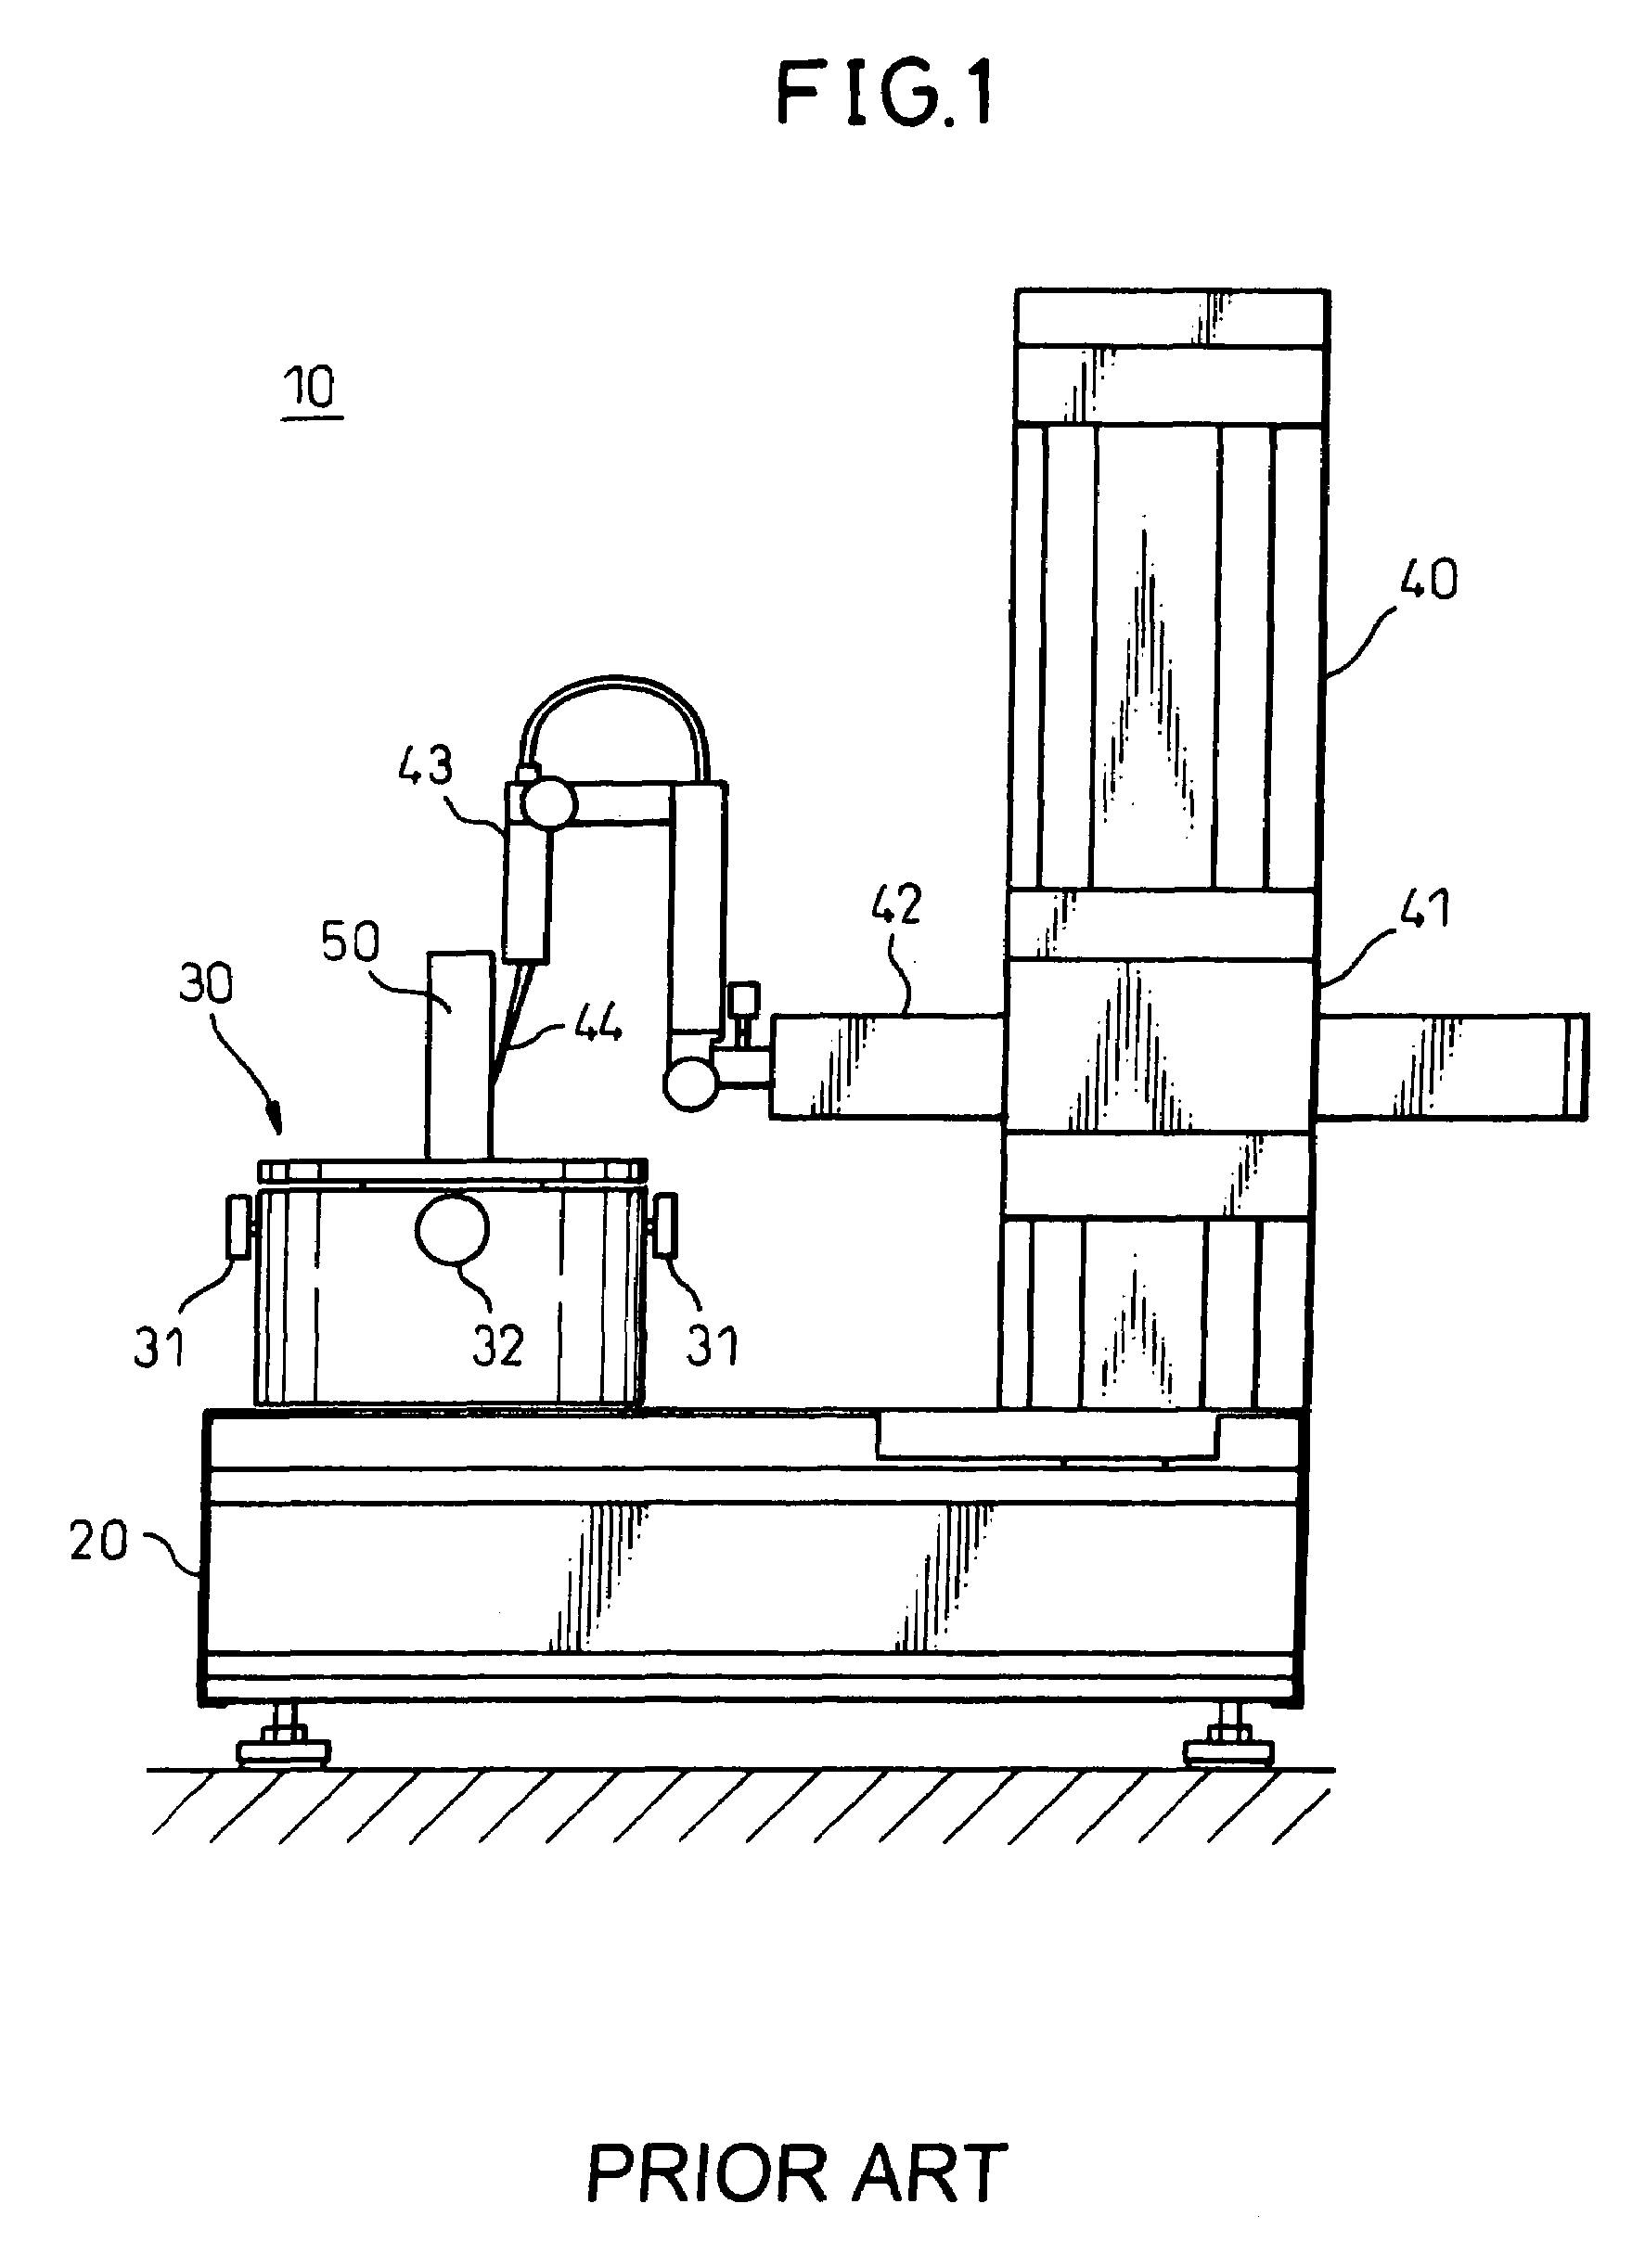 Device for measuring circularity and cylindrical shape